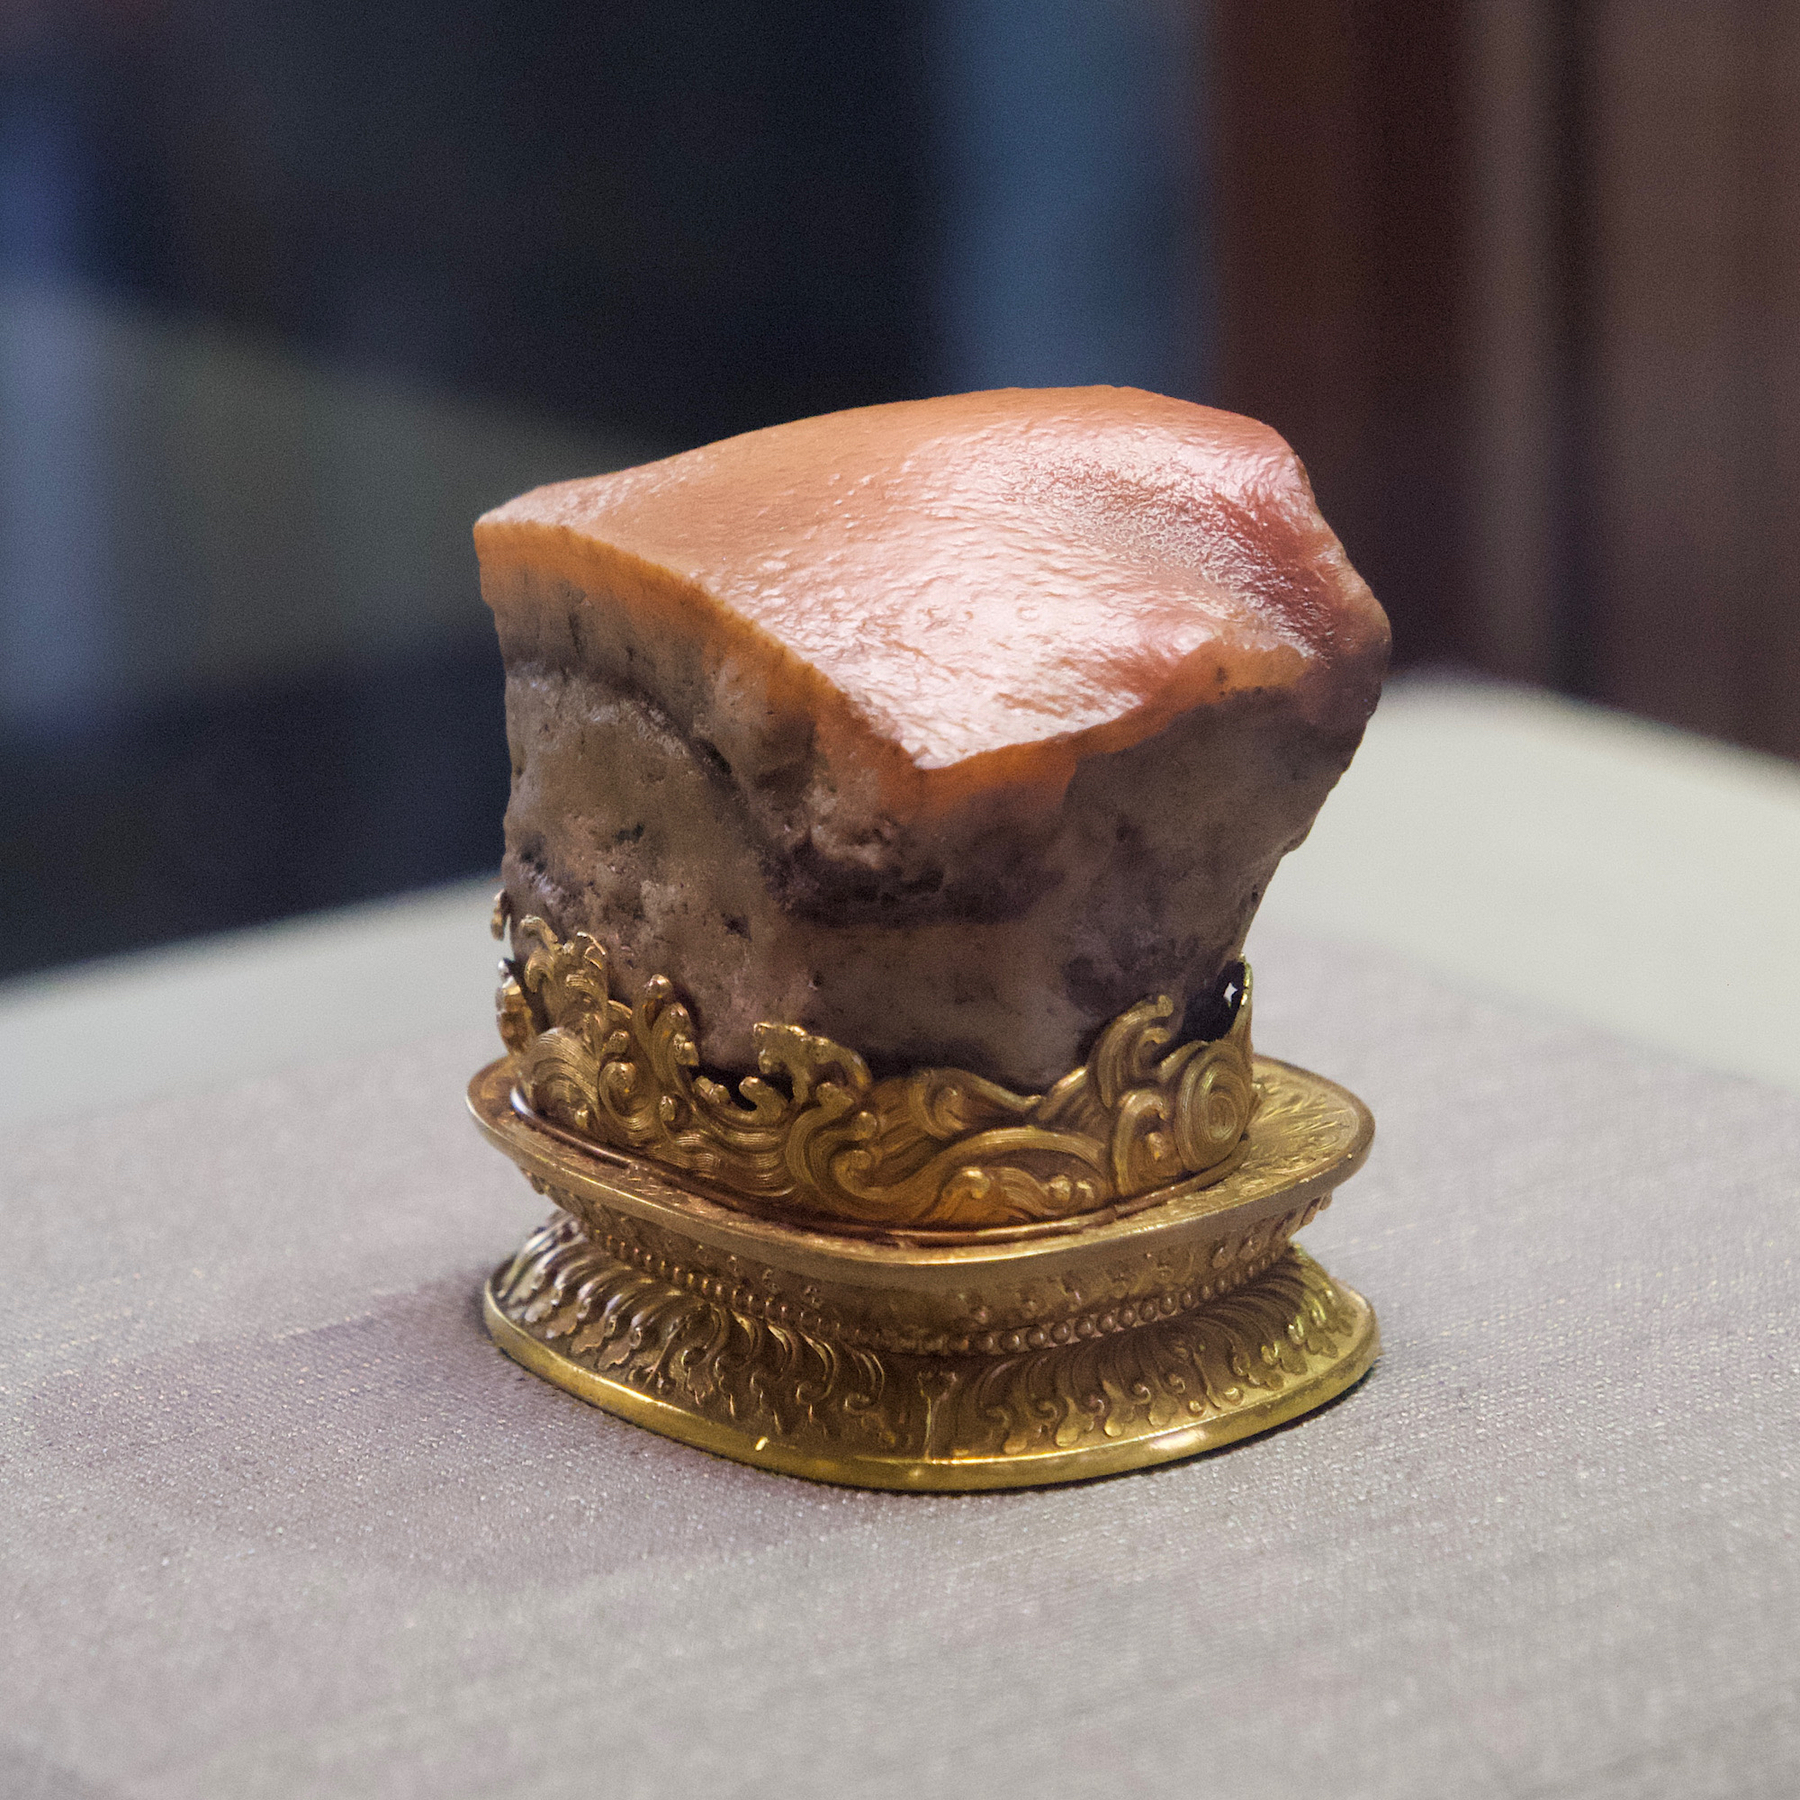 The famous Jasper stone carved to look like a piece of pork